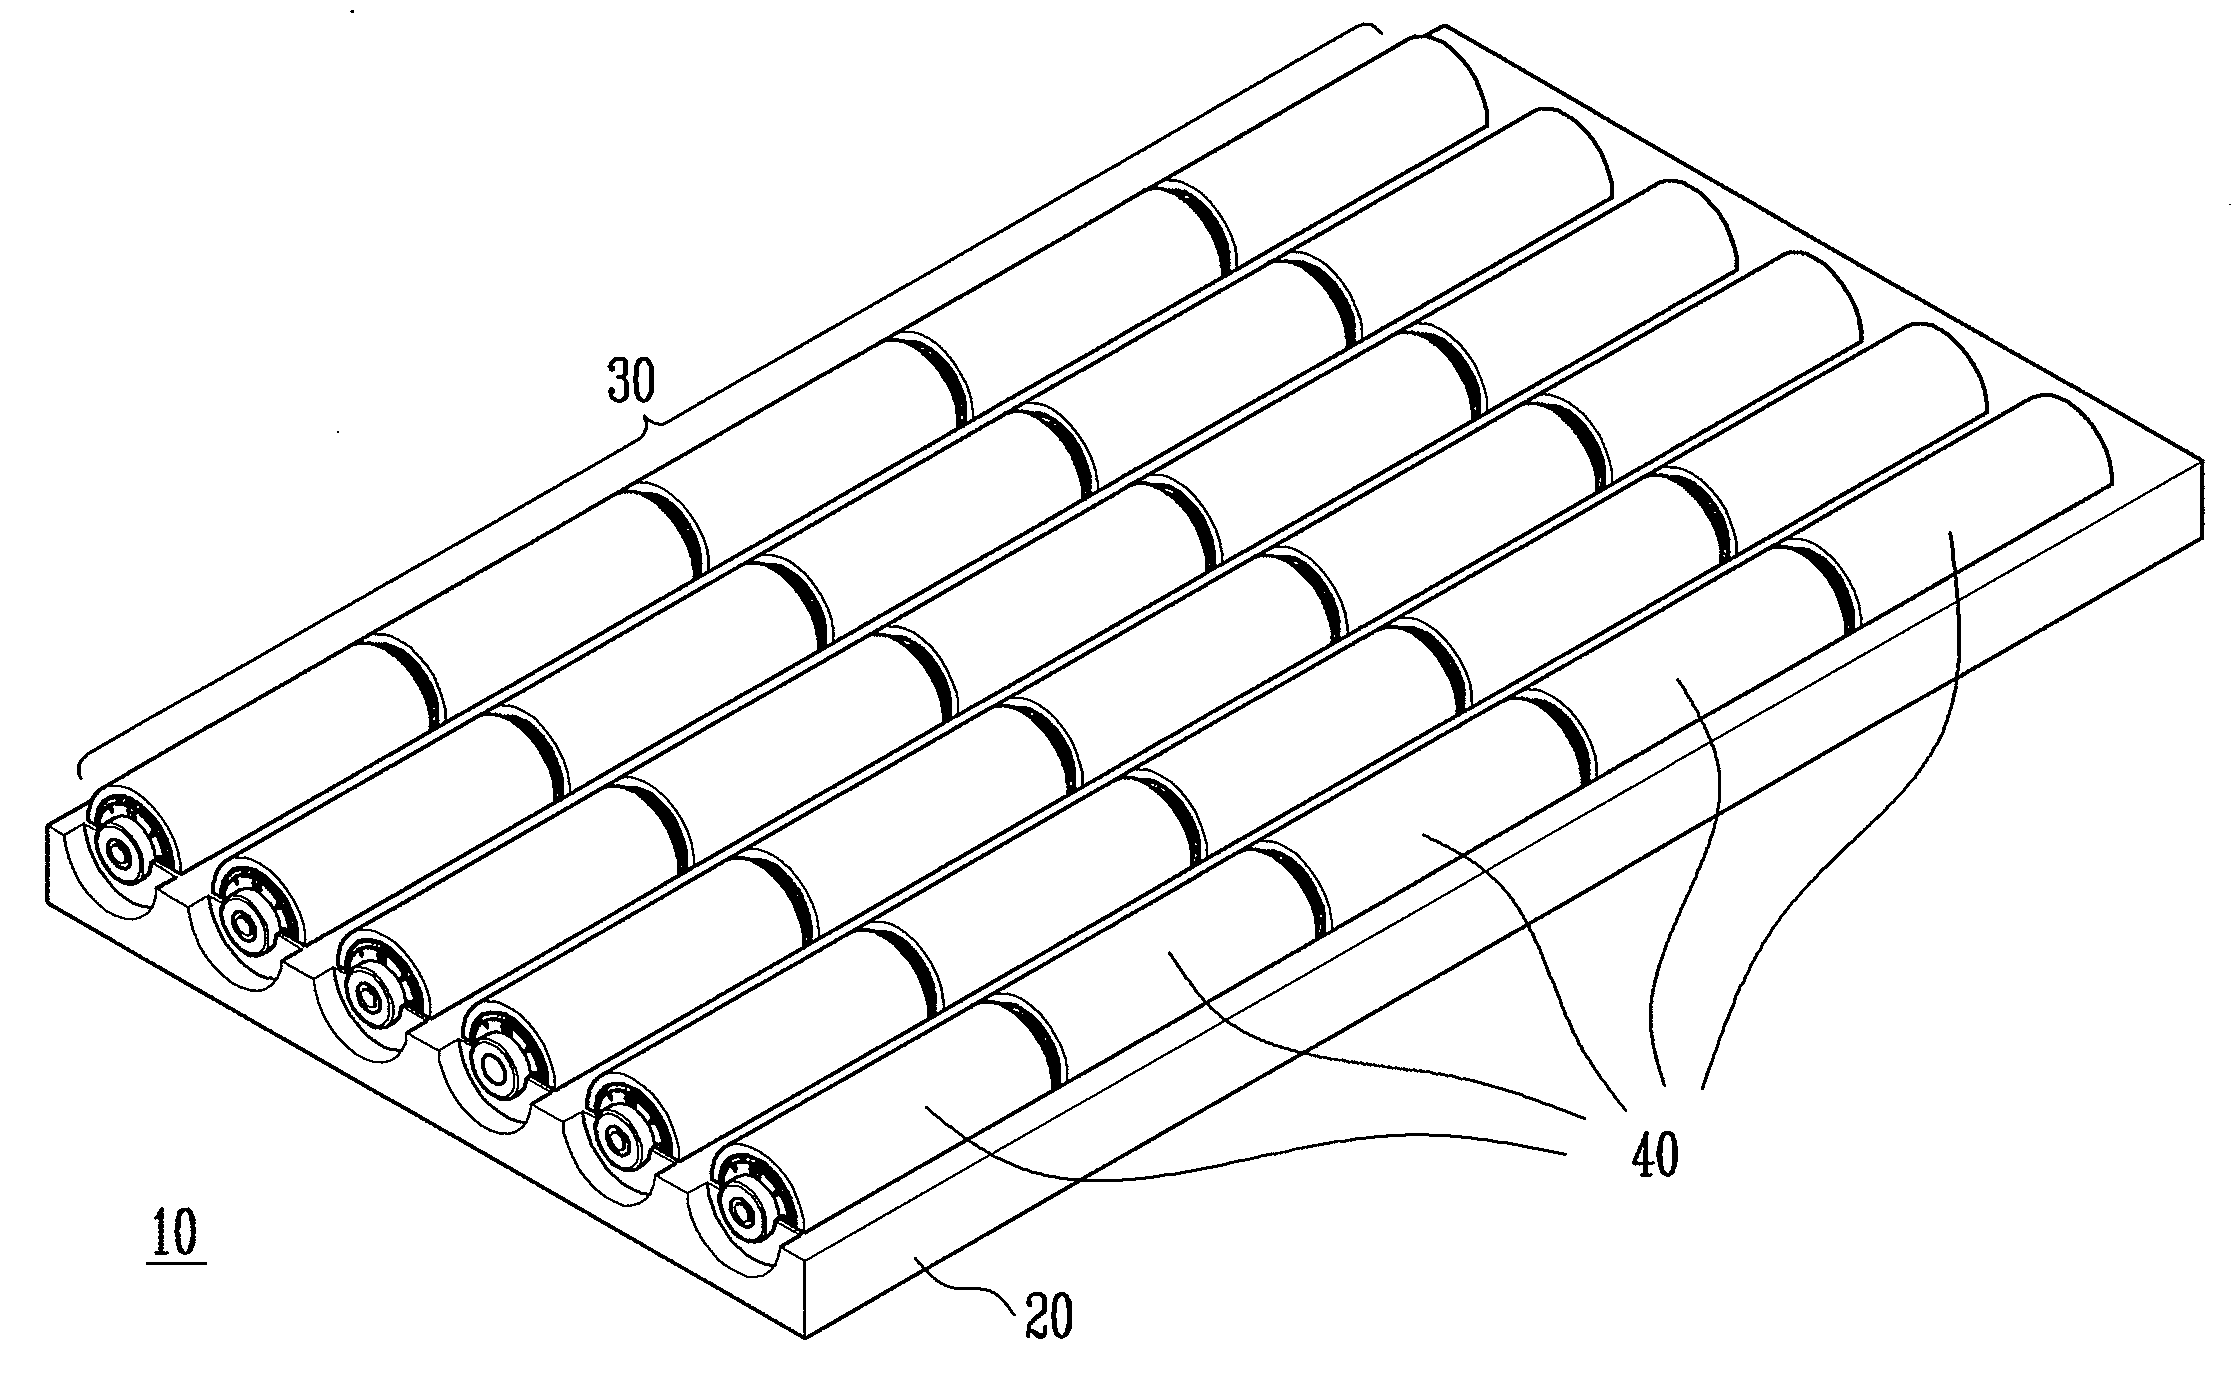 Inter-connector between unit cells and serial cell